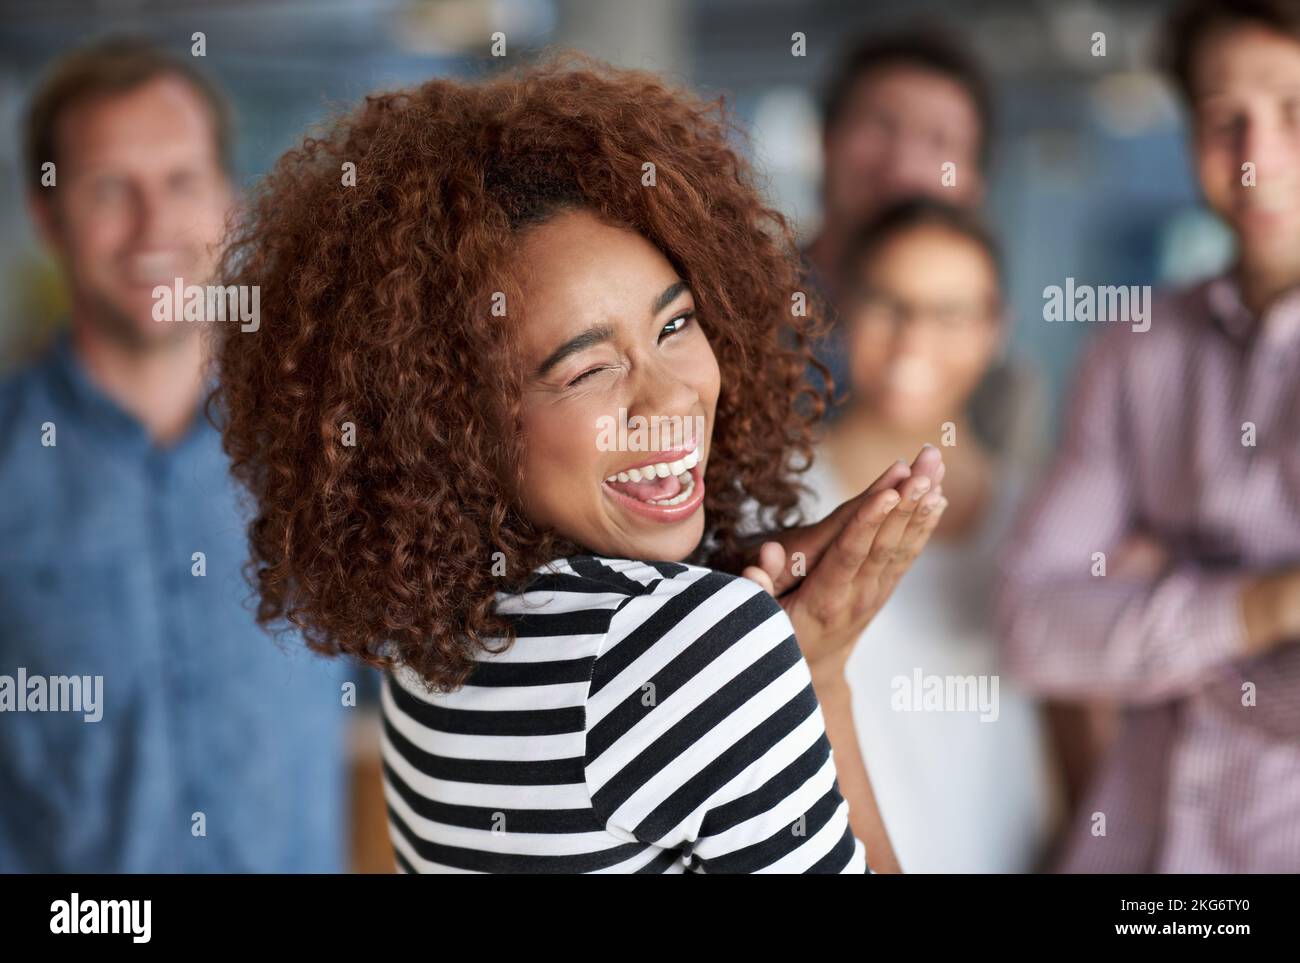 Shes the life of the office. Young woman smiling cheekily at the camera with colleagues in the background. Stock Photo